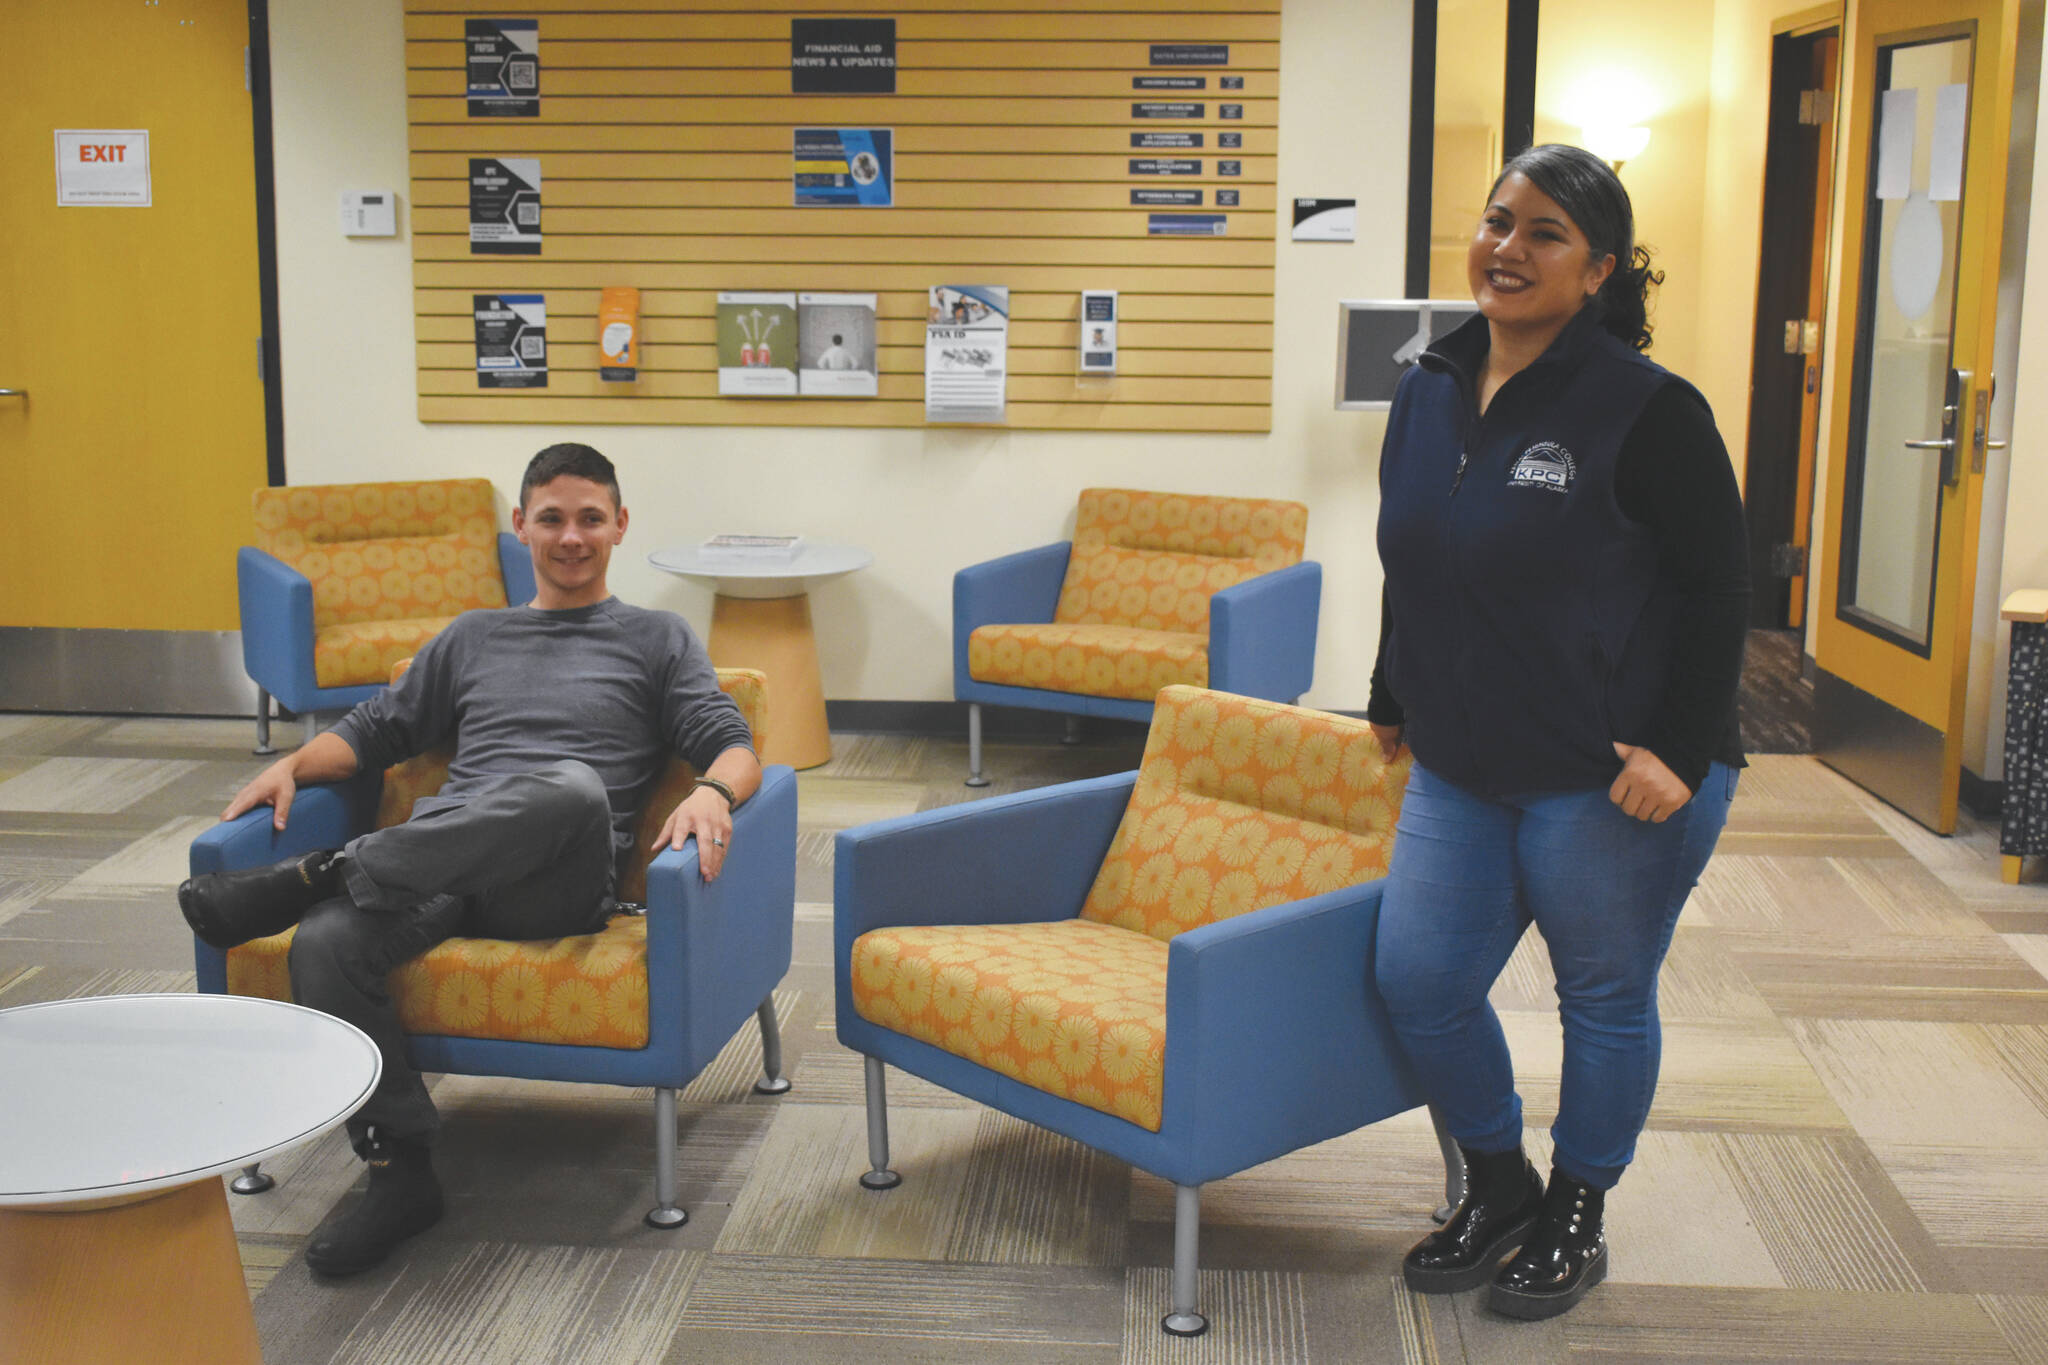 photos by Jake Dye / Peninsula Clarion 
Alex LeClair, Kenai Peninsula College enrollment specialist, and Natasha Sison, financial aid specialist with the KPC Financial Aid Office, are seen in the Kenai Peninsula College Student Services Office on Thursday near Soldotna.